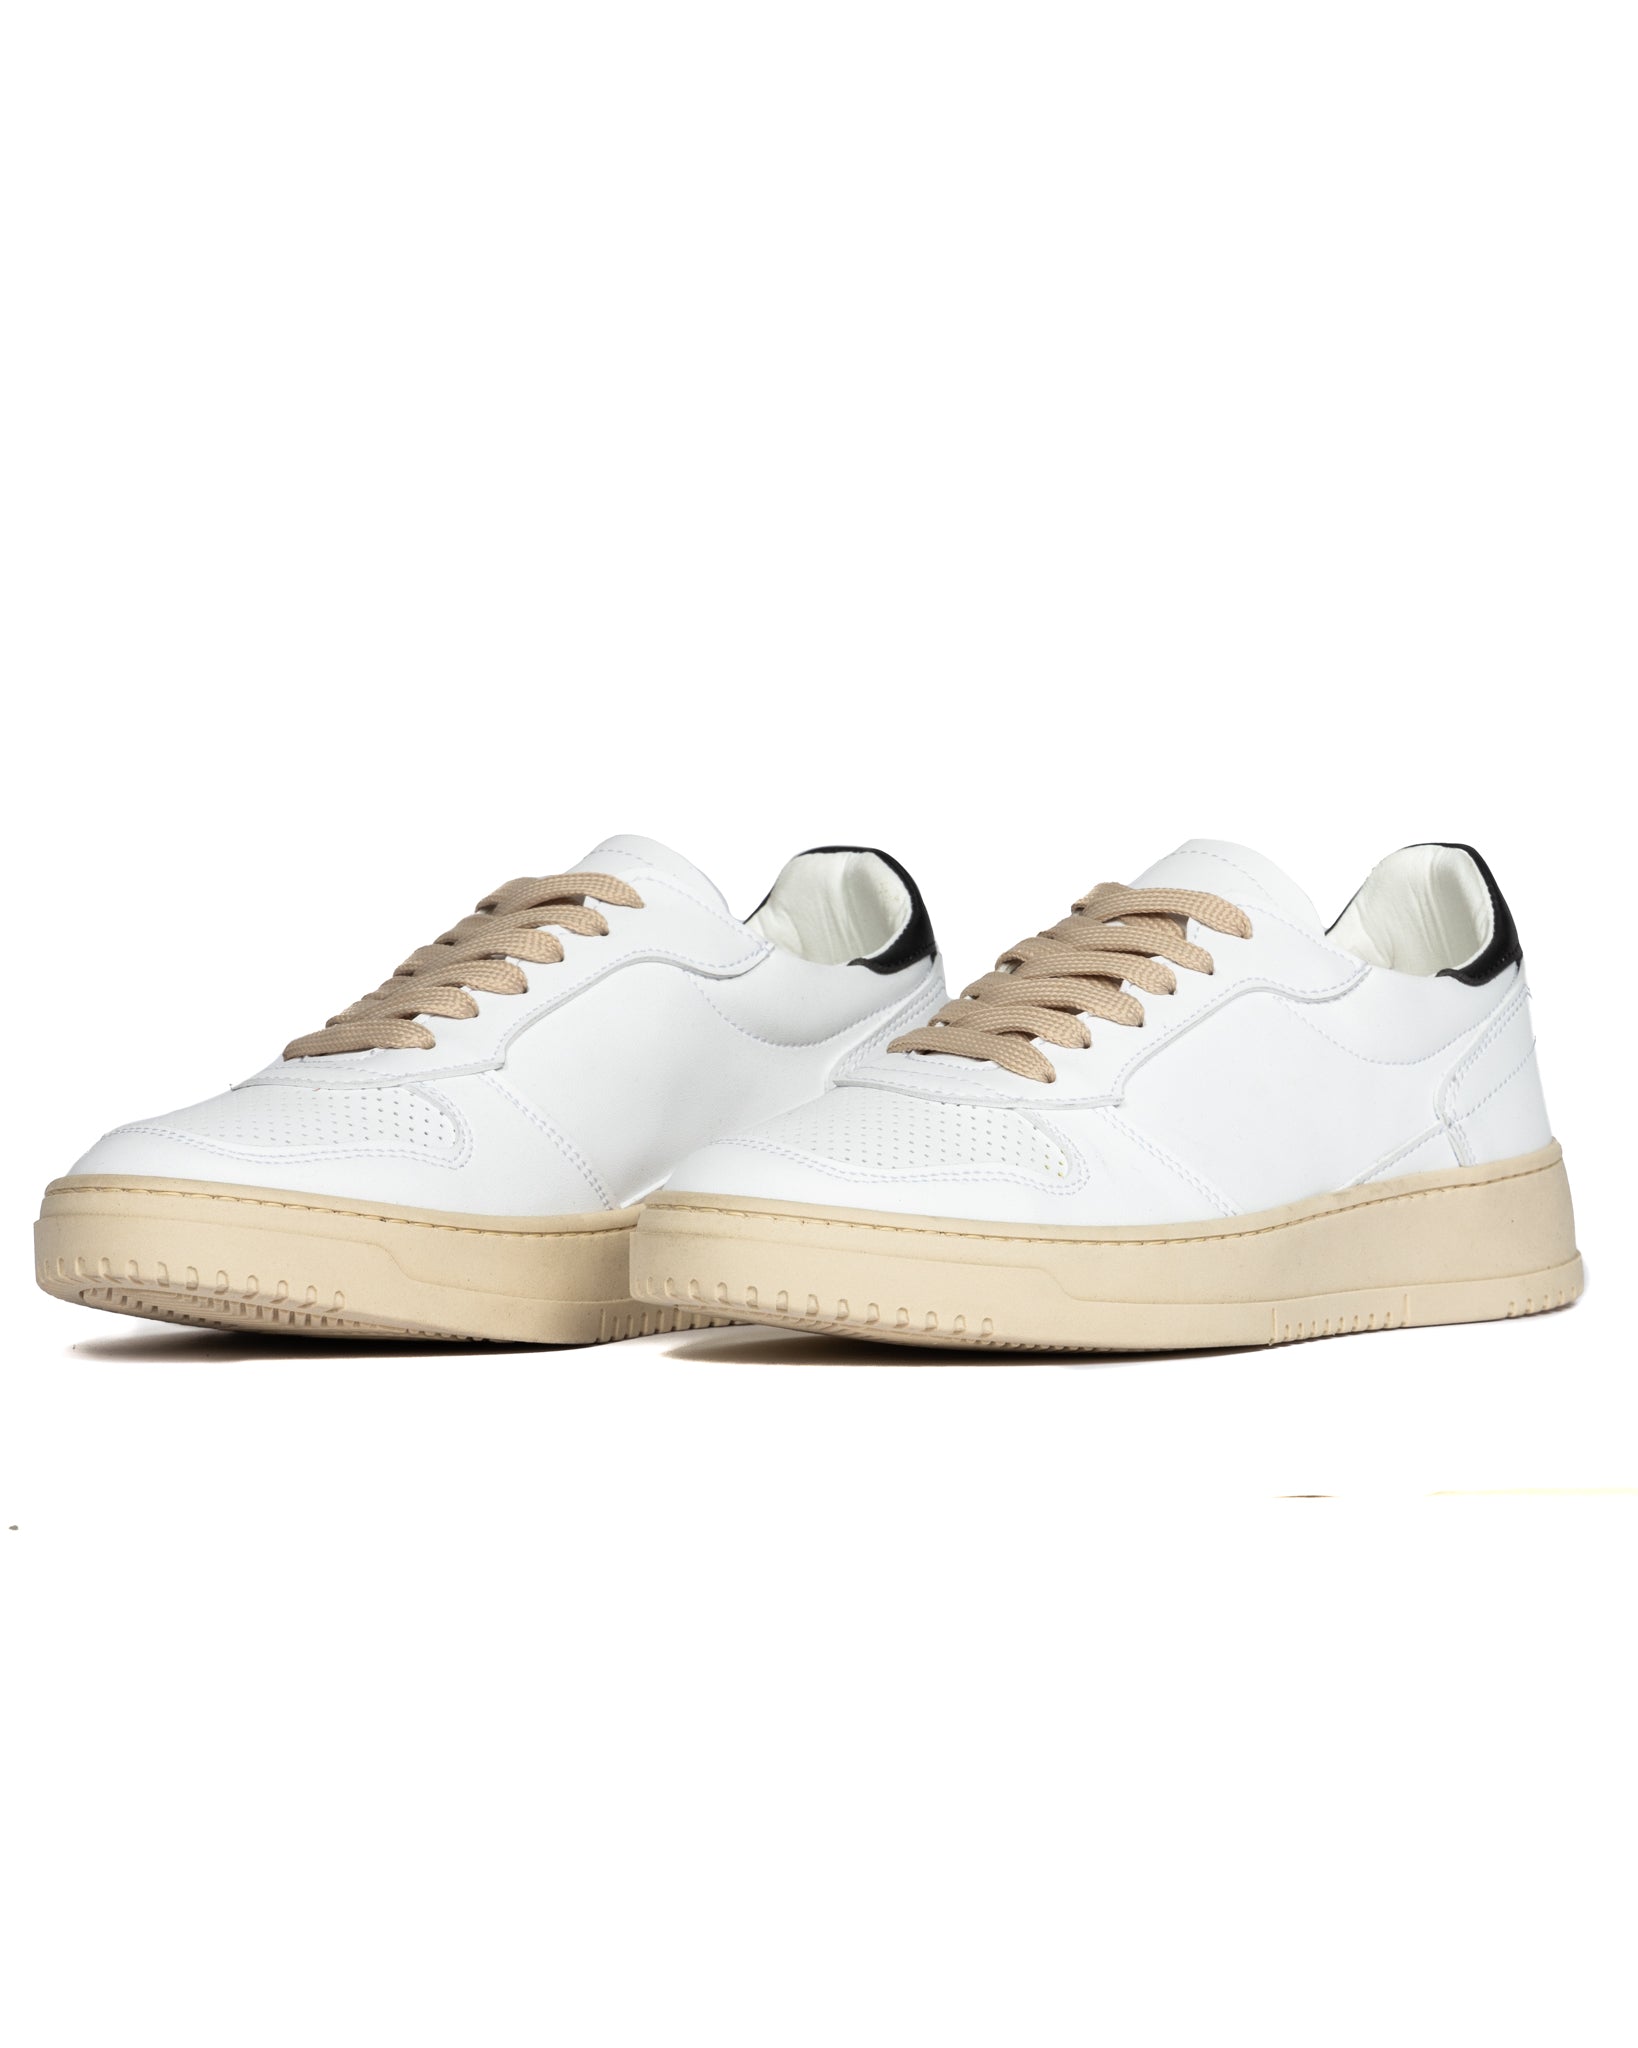 S07 - white leather sneakers with black details